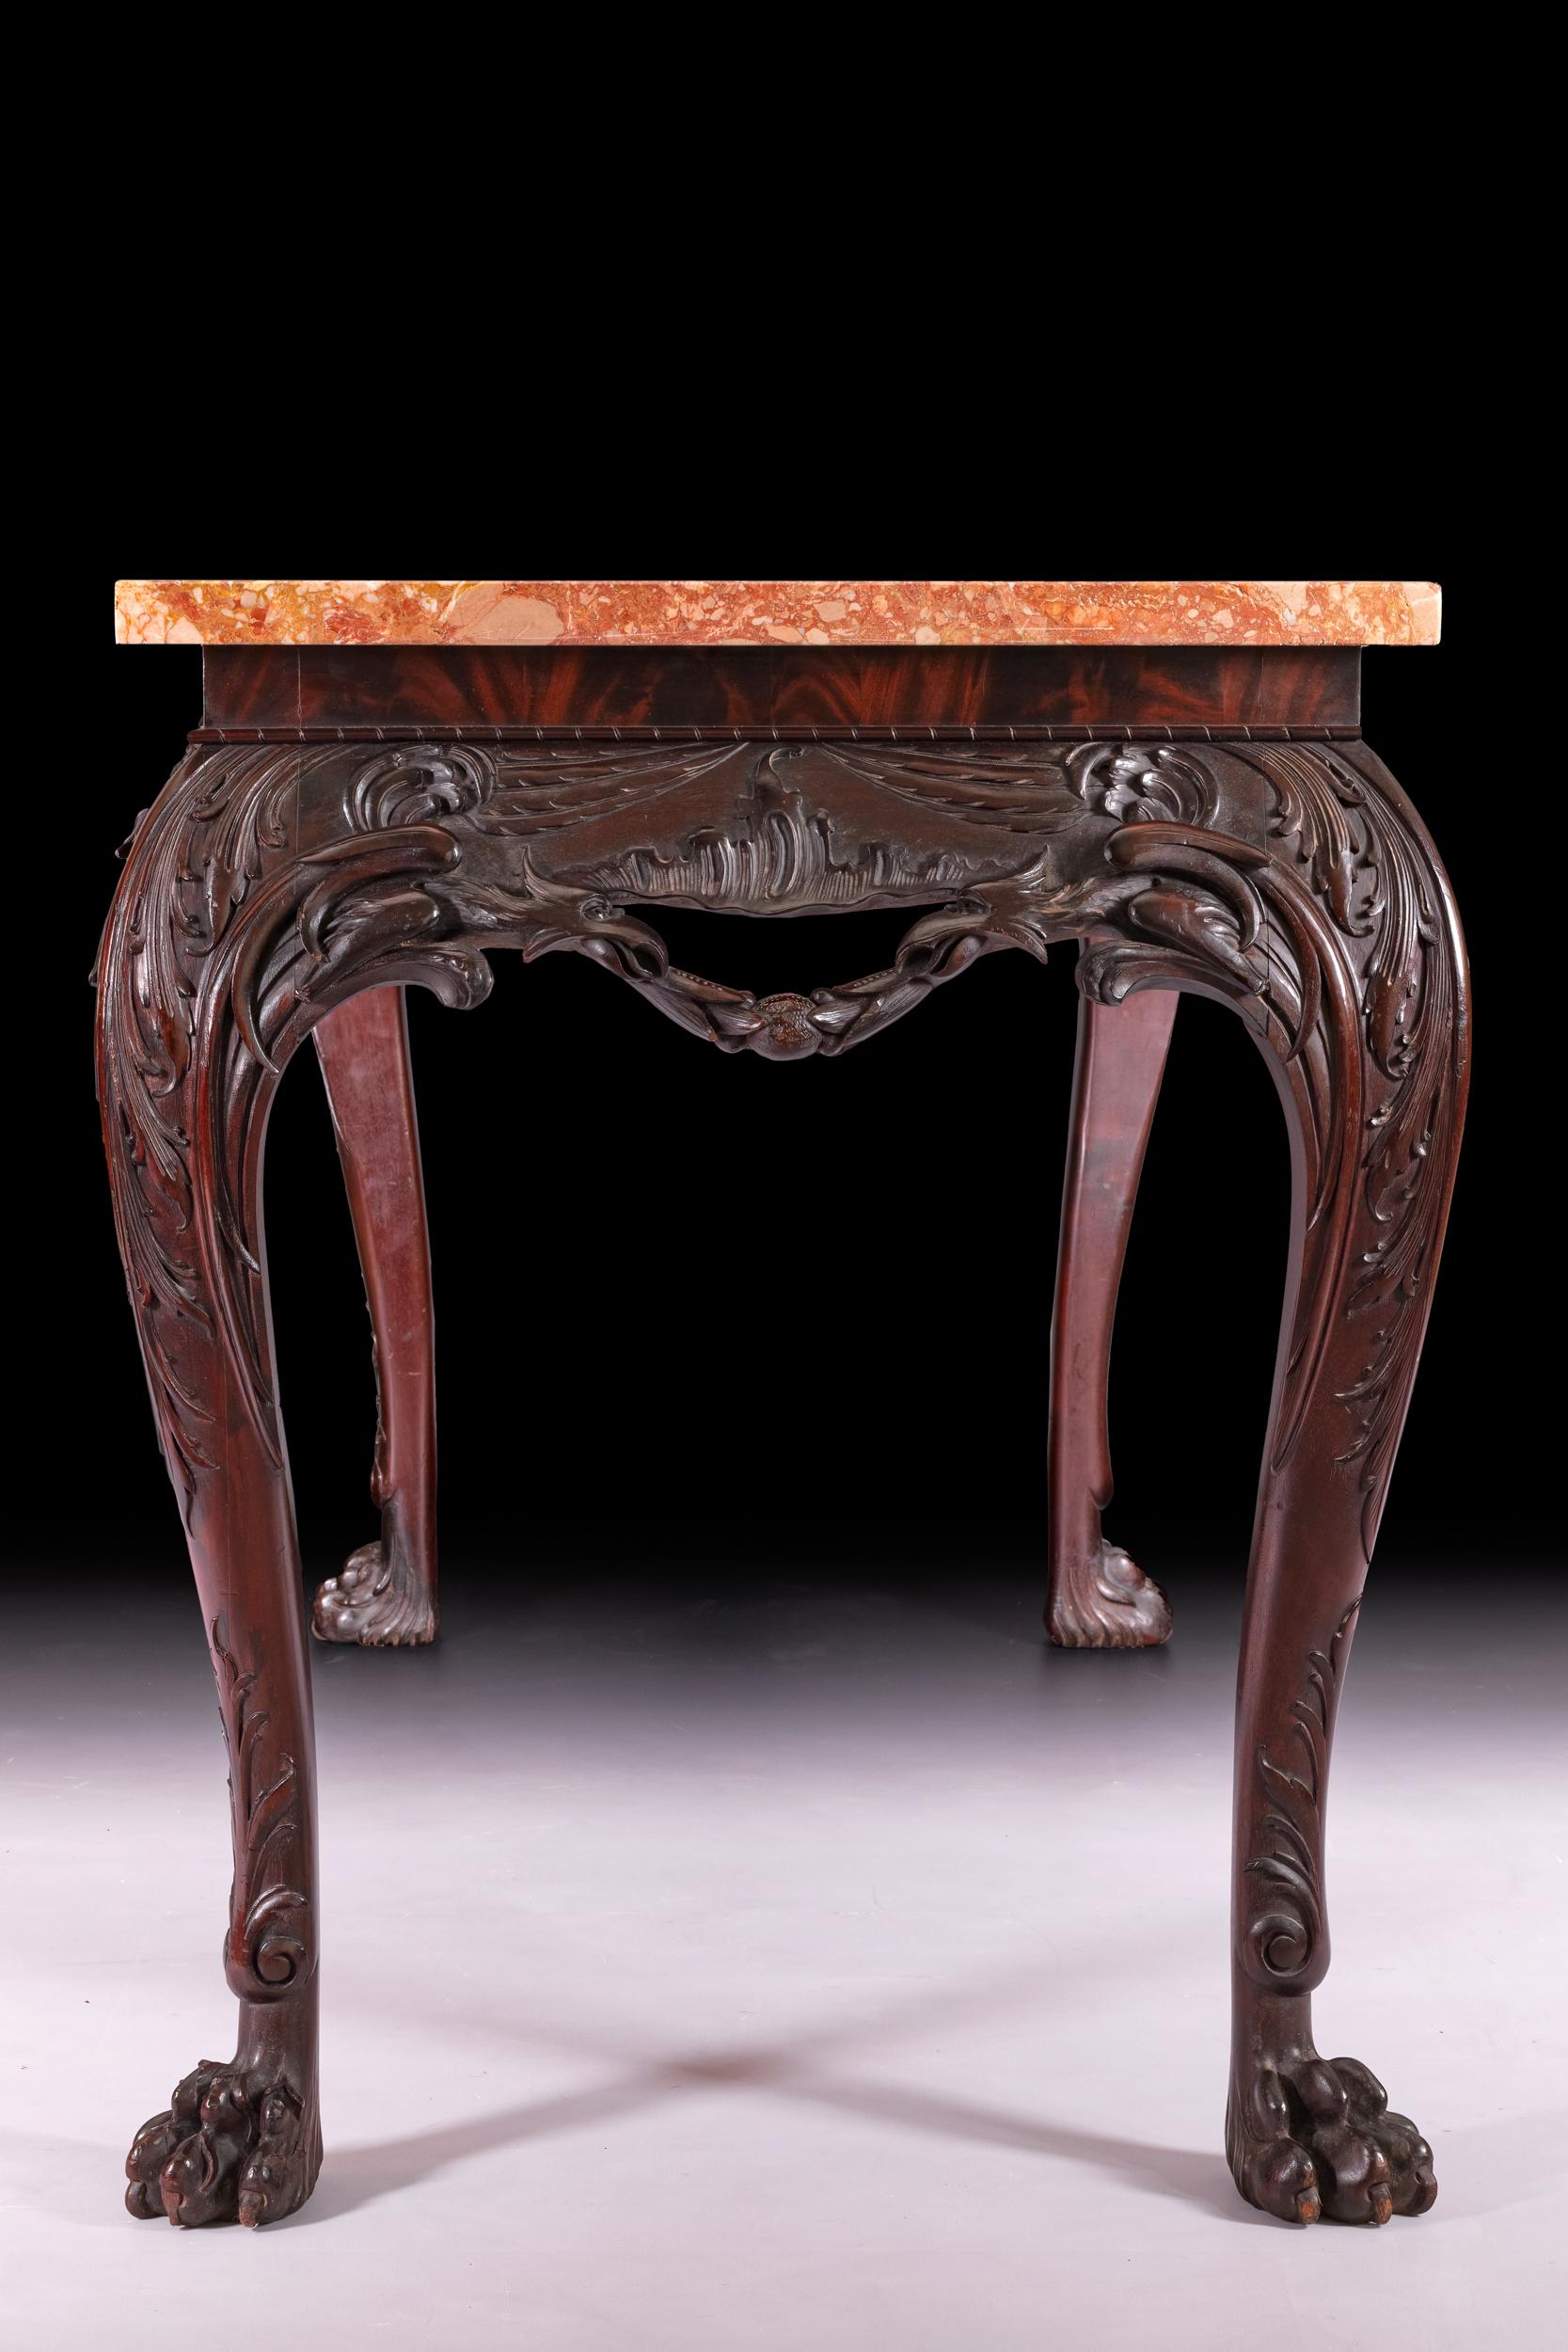 19th Century Irish Marble Top Console Table In the George III Style For Sale 3